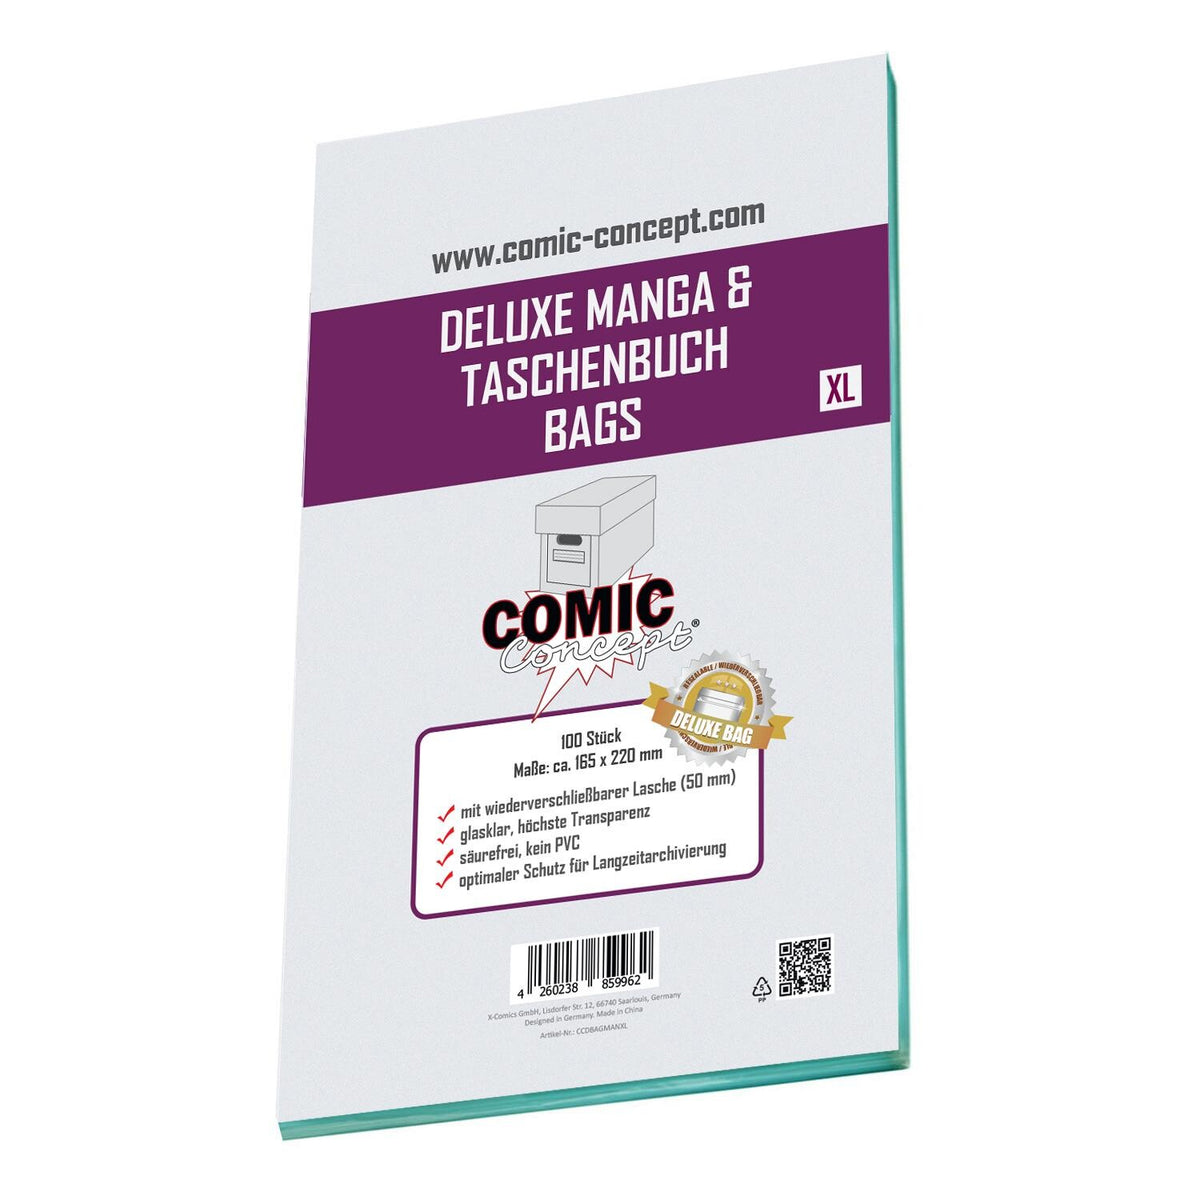 Comic Concept - Deluxe Manga Bags - Size XL (165 x 220 mm) 100 pieces